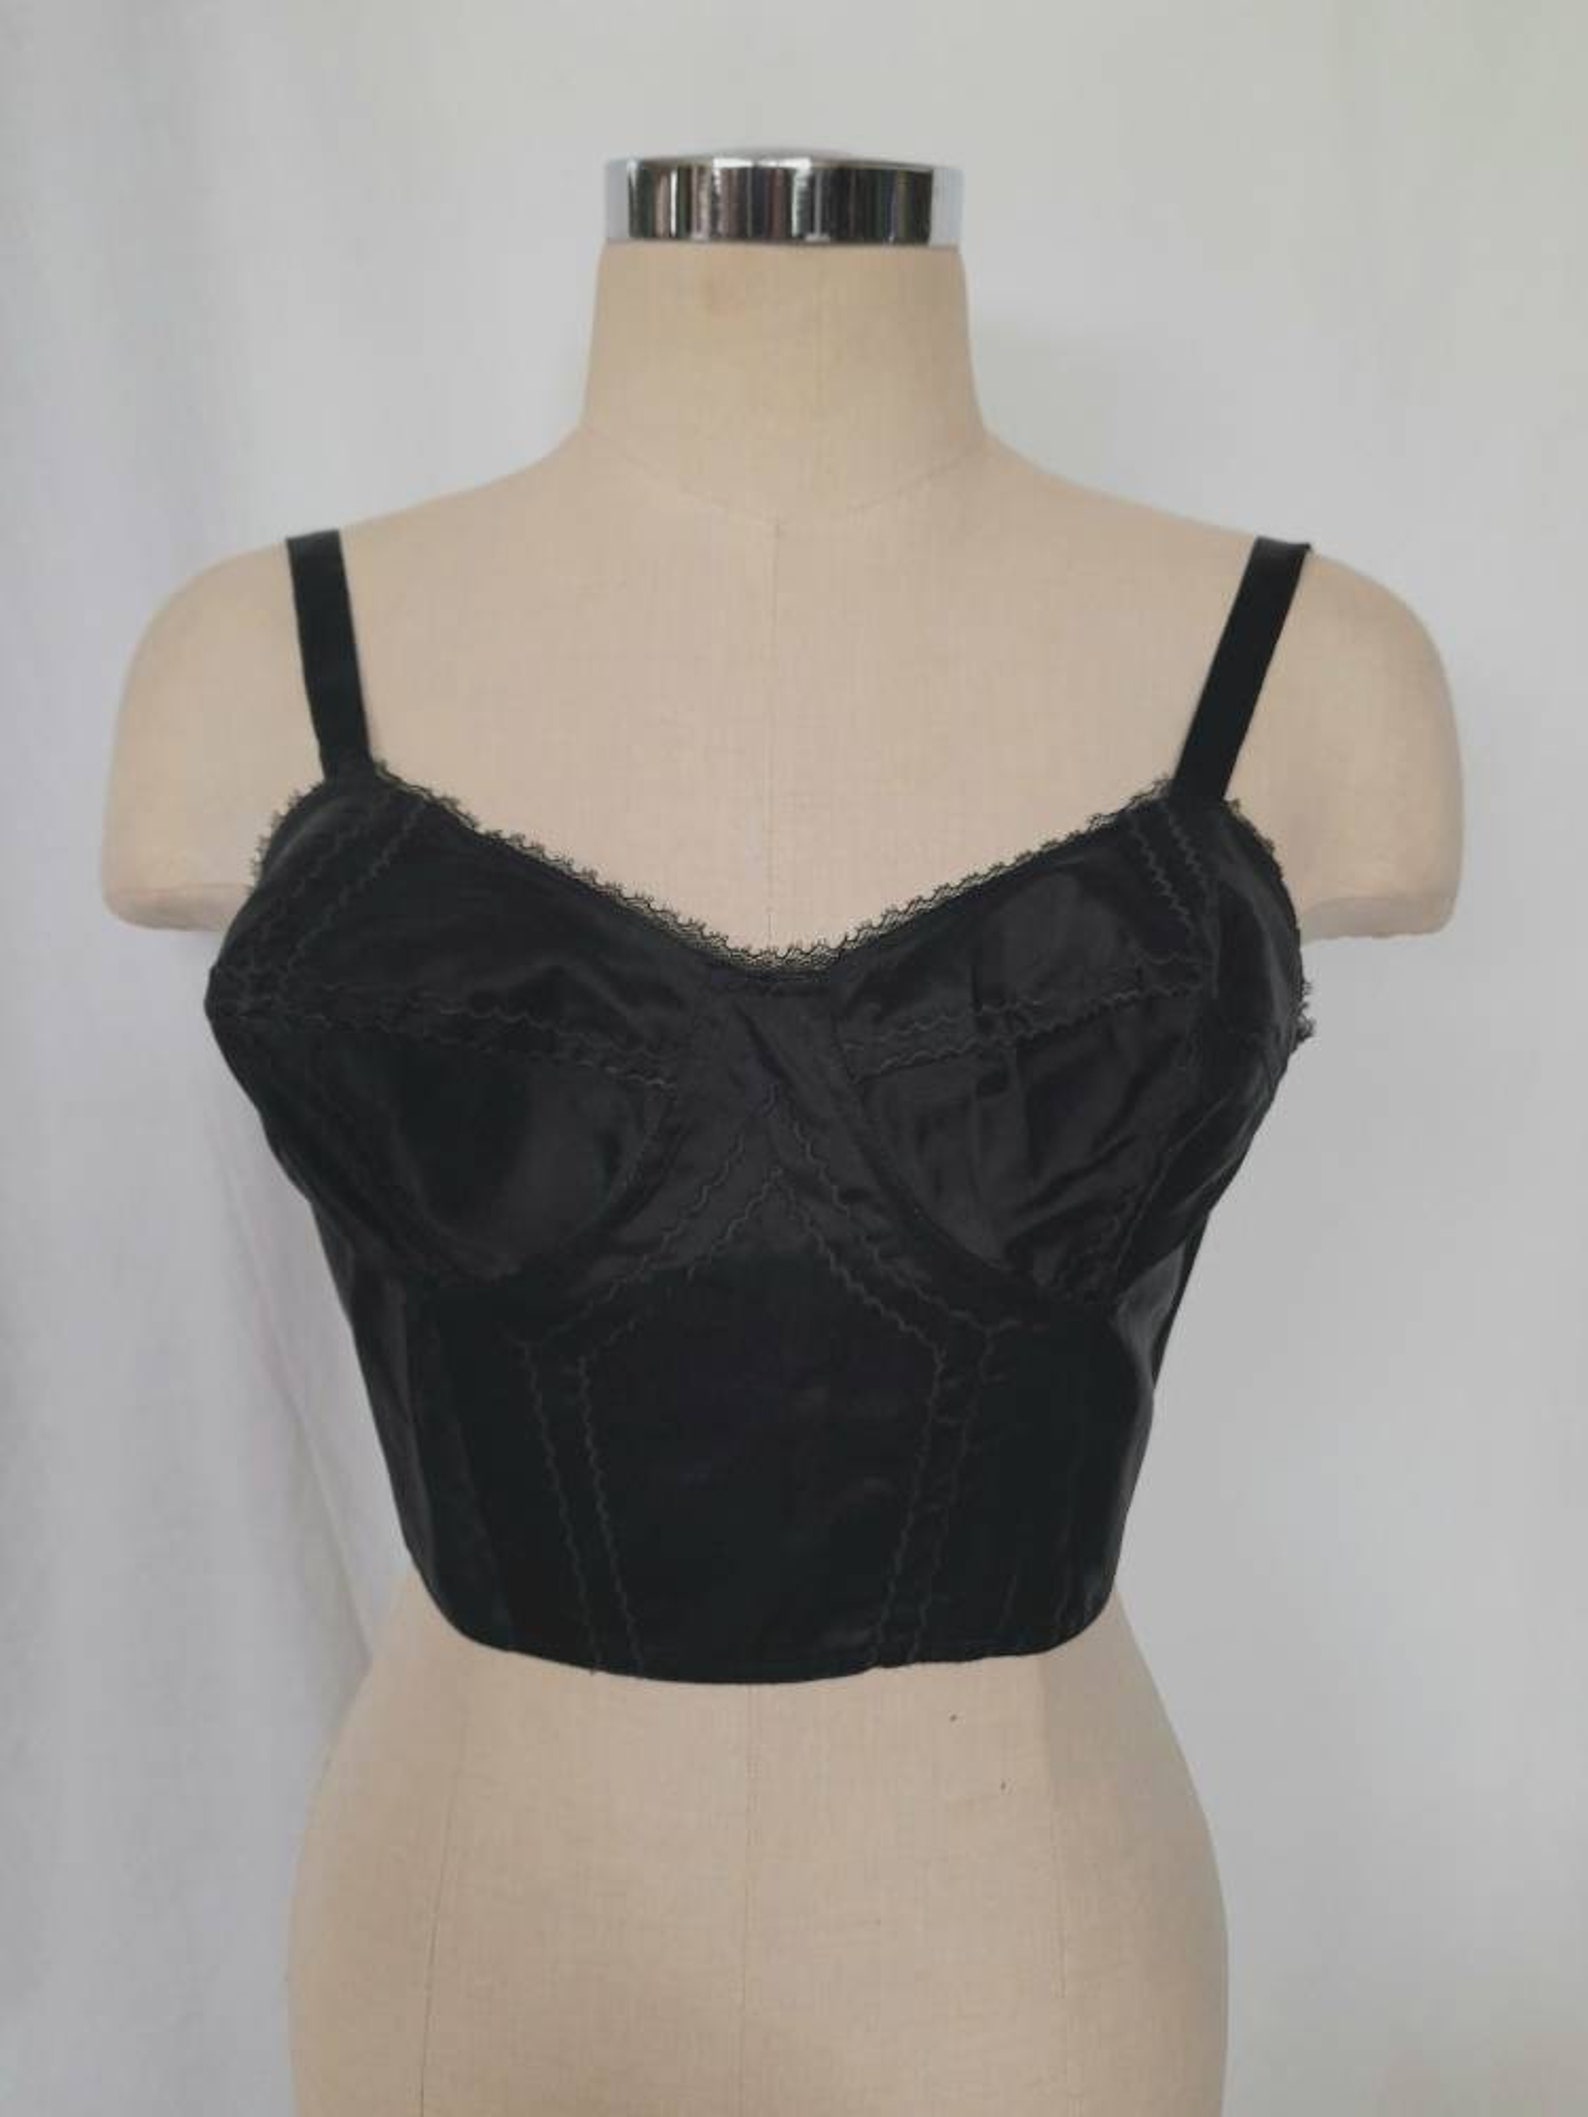 Vintage 60's Pointed Black Bullet Corset Bra with | Etsy